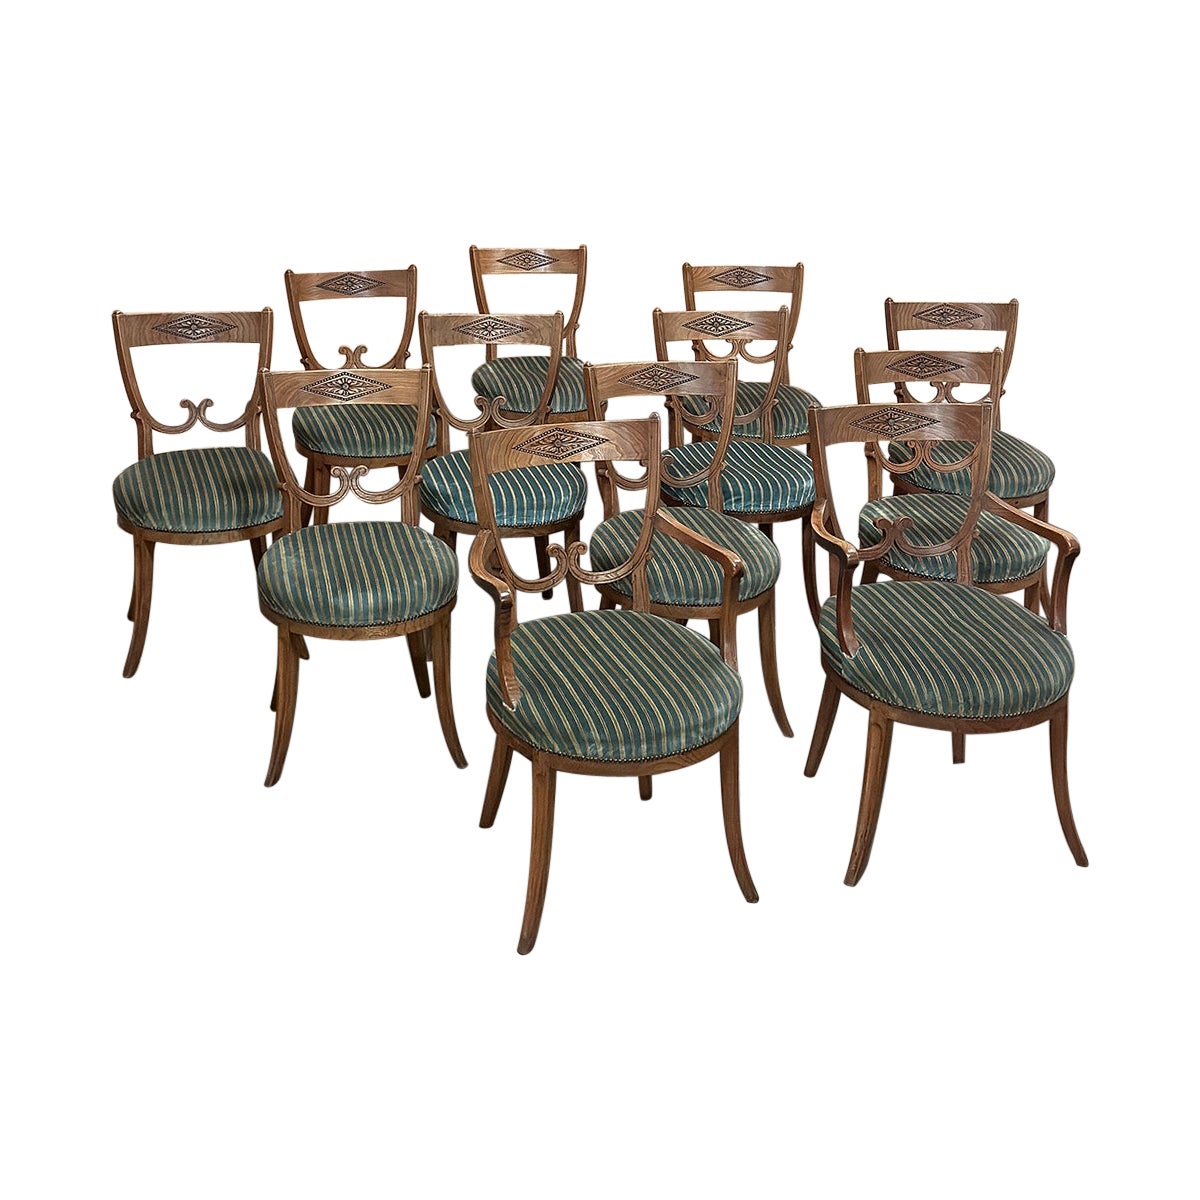 Set of Twelve 18th Century Swedish Gustavian Dining Chairs includes 2 Armchairs For Sale